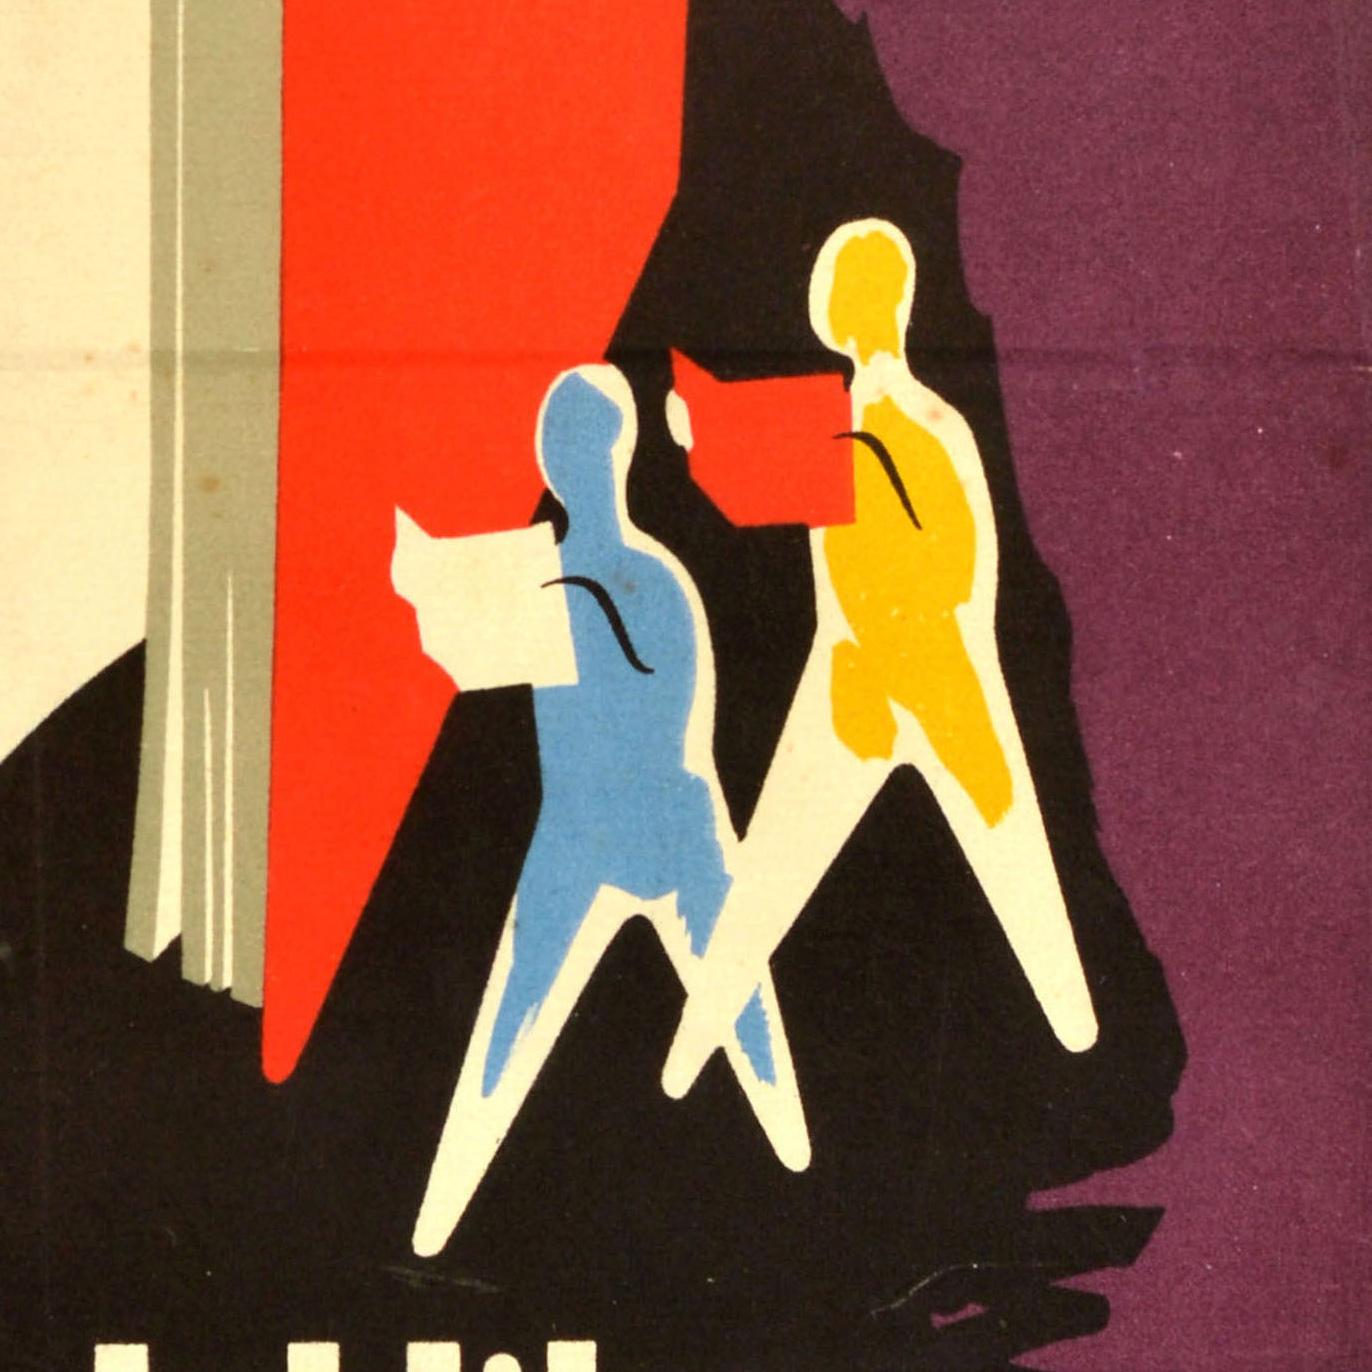 Original vintage advertising poster for the Dia del libro IV Centenario del Gremio de Libreros de Barcelona / Book Day IV Centenary of the Booksellers' Guild of Barcelona on 23 April 1954 featuring an illustration of blue and yellow silhouettes of